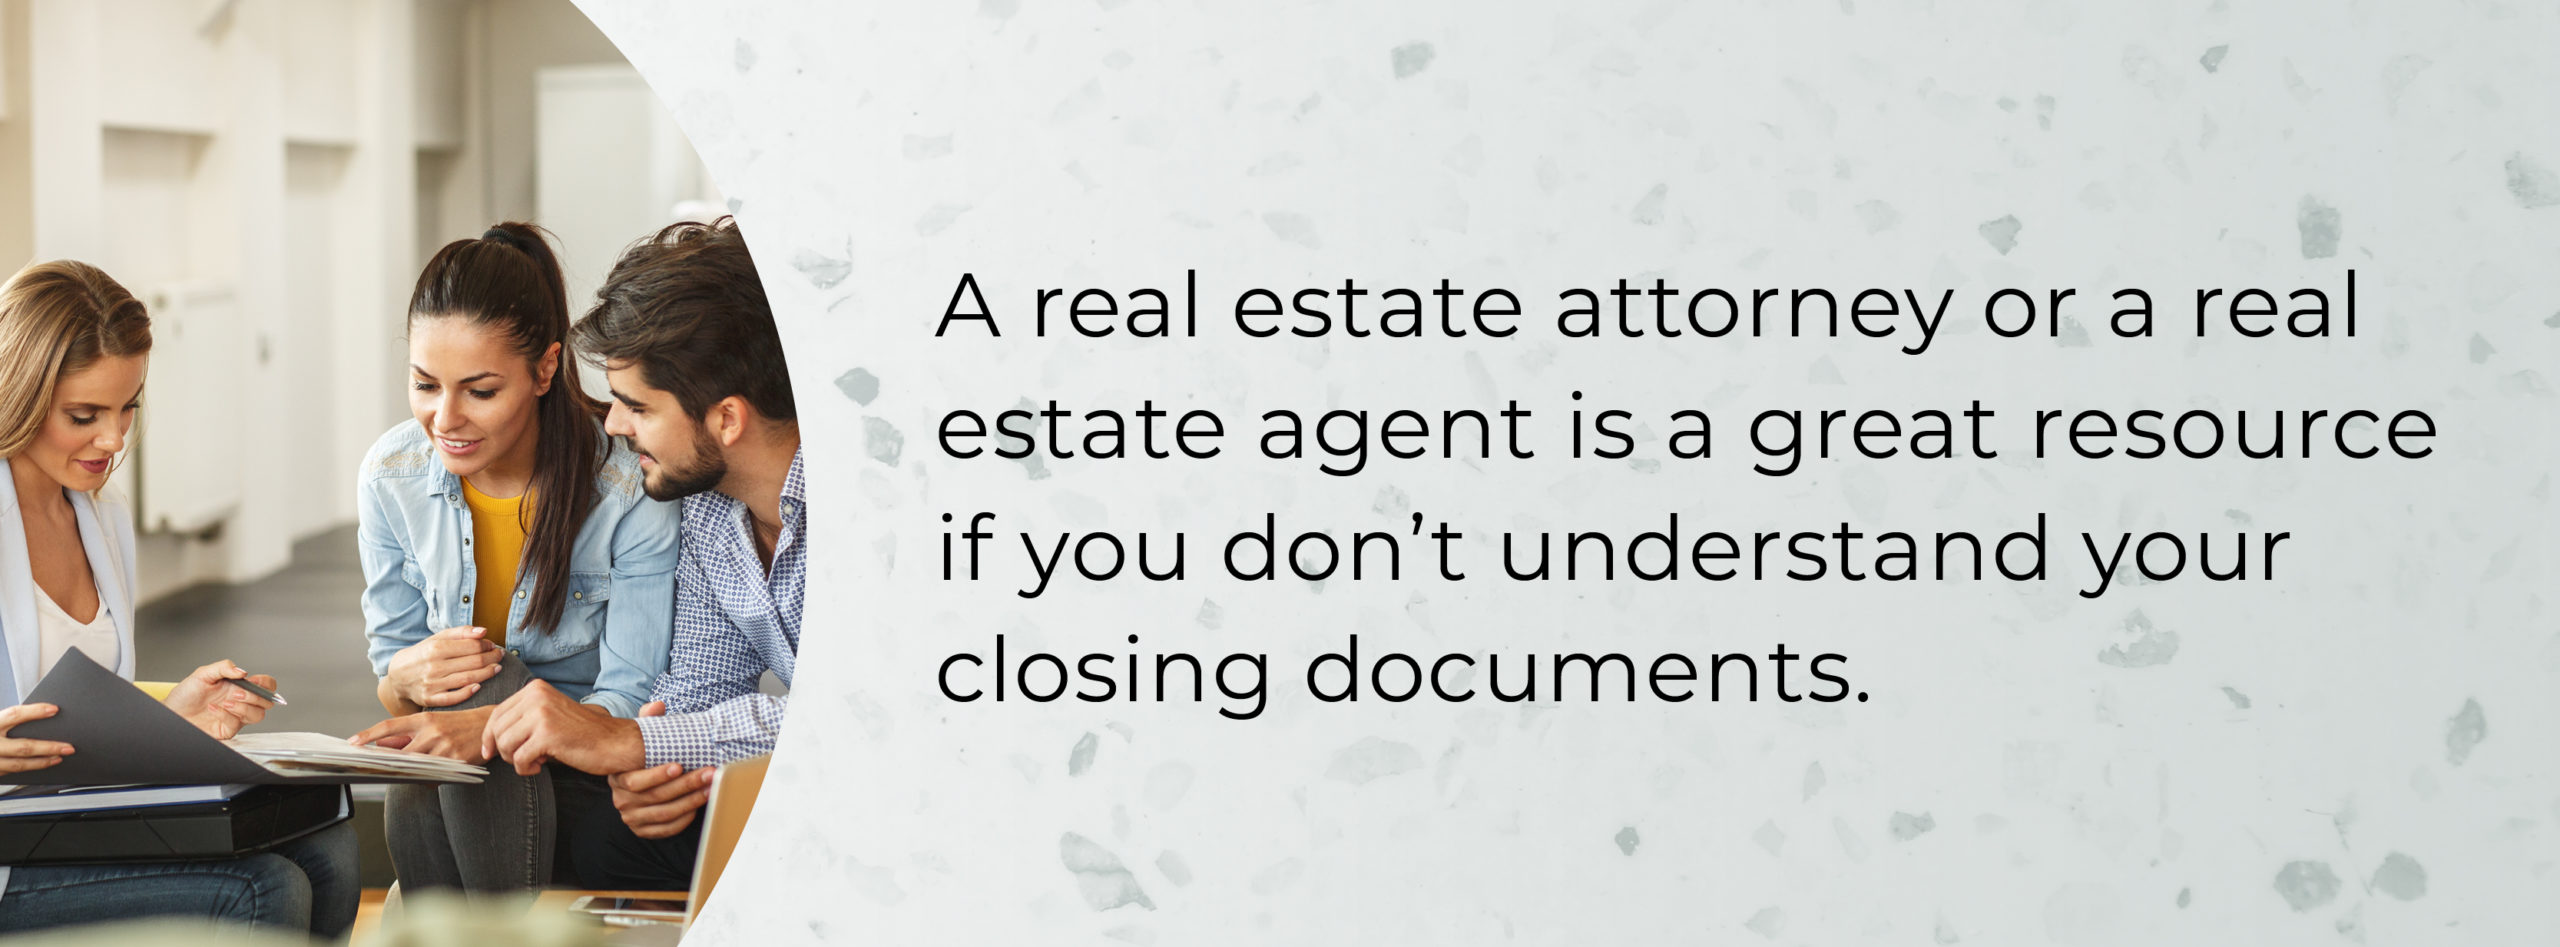 real estate agent and attorney can help with closing documents